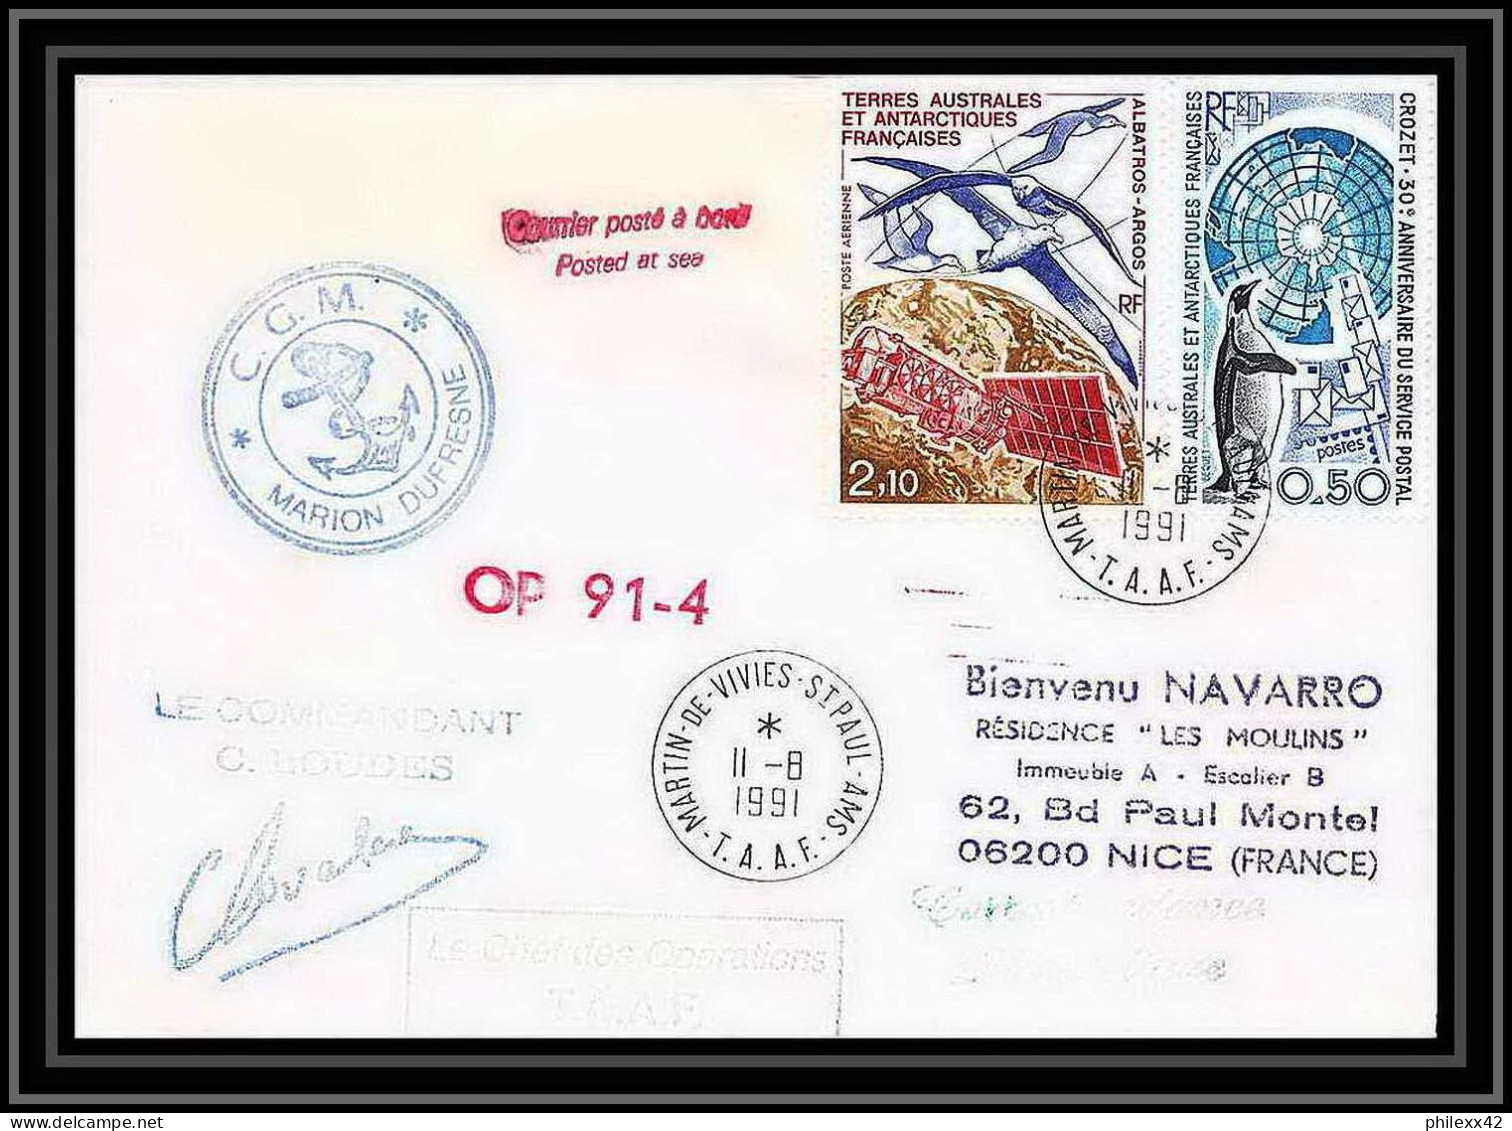 1761 Op 91/4 Signé Signed Ploudes 11/8/1991 Marion Dufresne TAAF Antarctic Terres Australes Lettre (cover) - Antarktis-Expeditionen